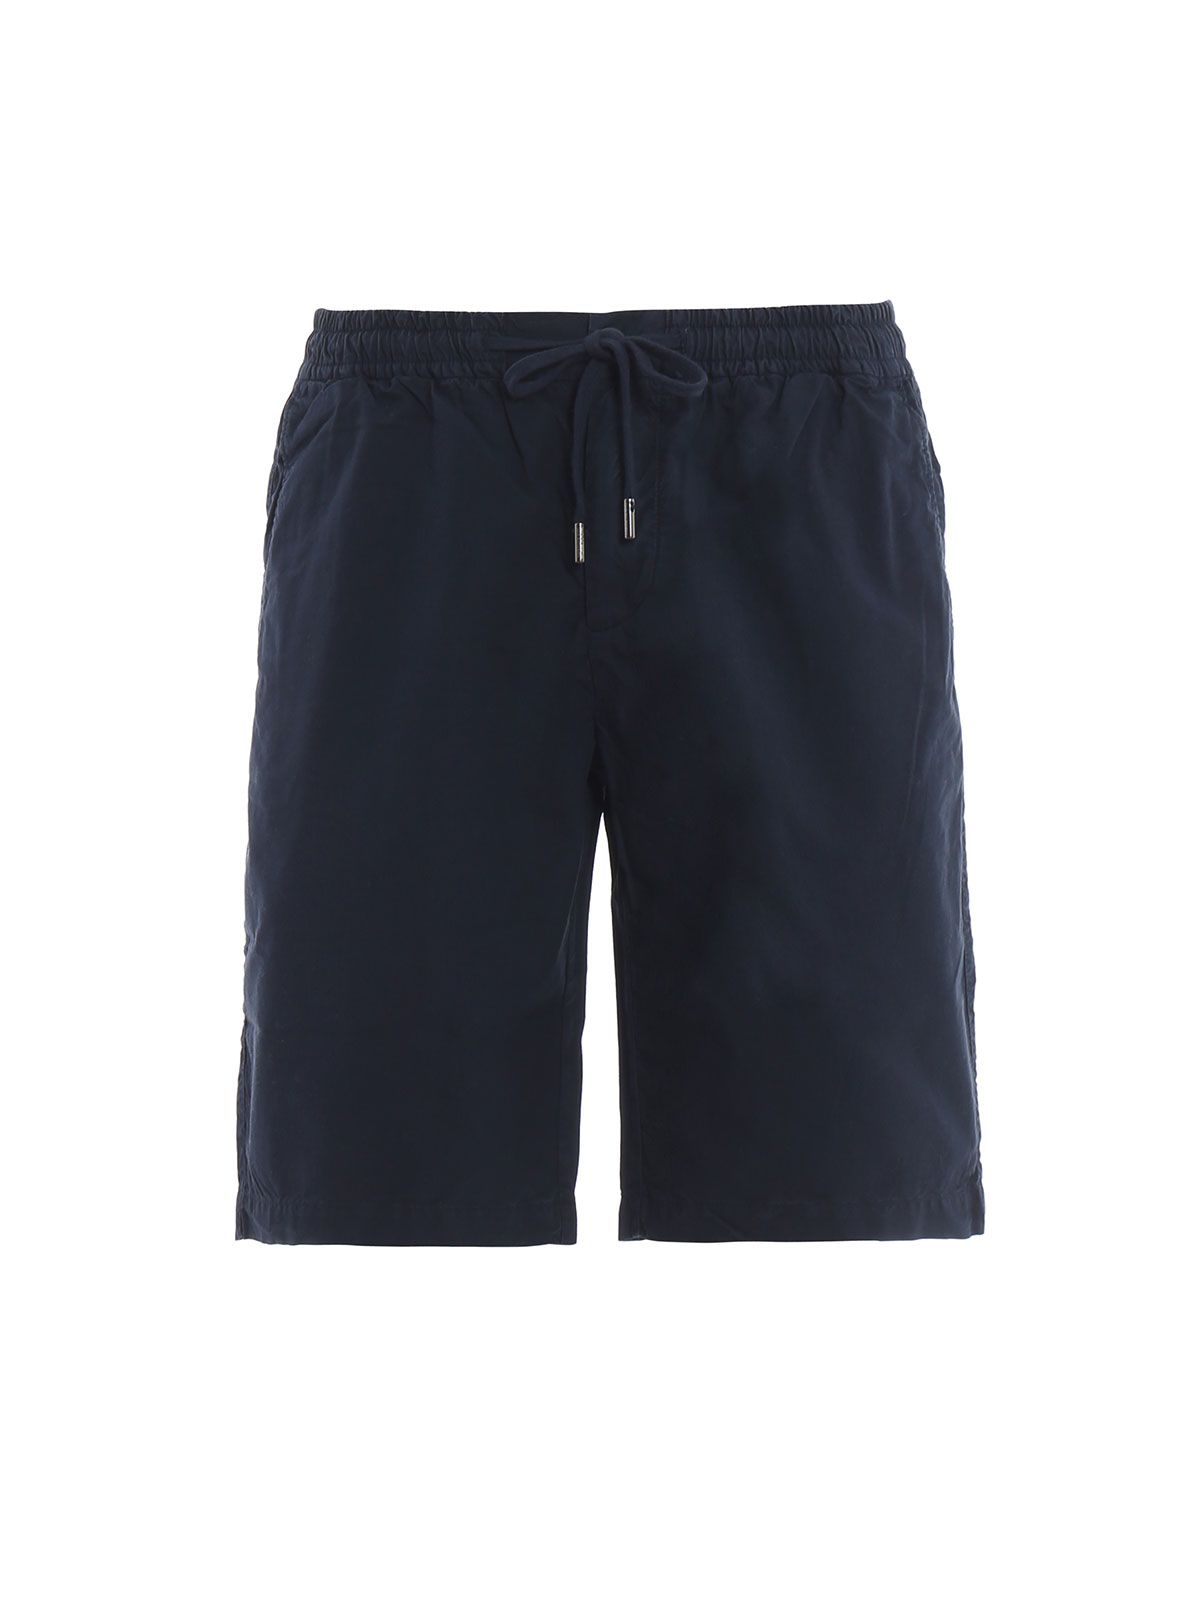 Trousers Shorts Woolrich - Micro Ripstop blue shorts - WOSHO0409UT14773827